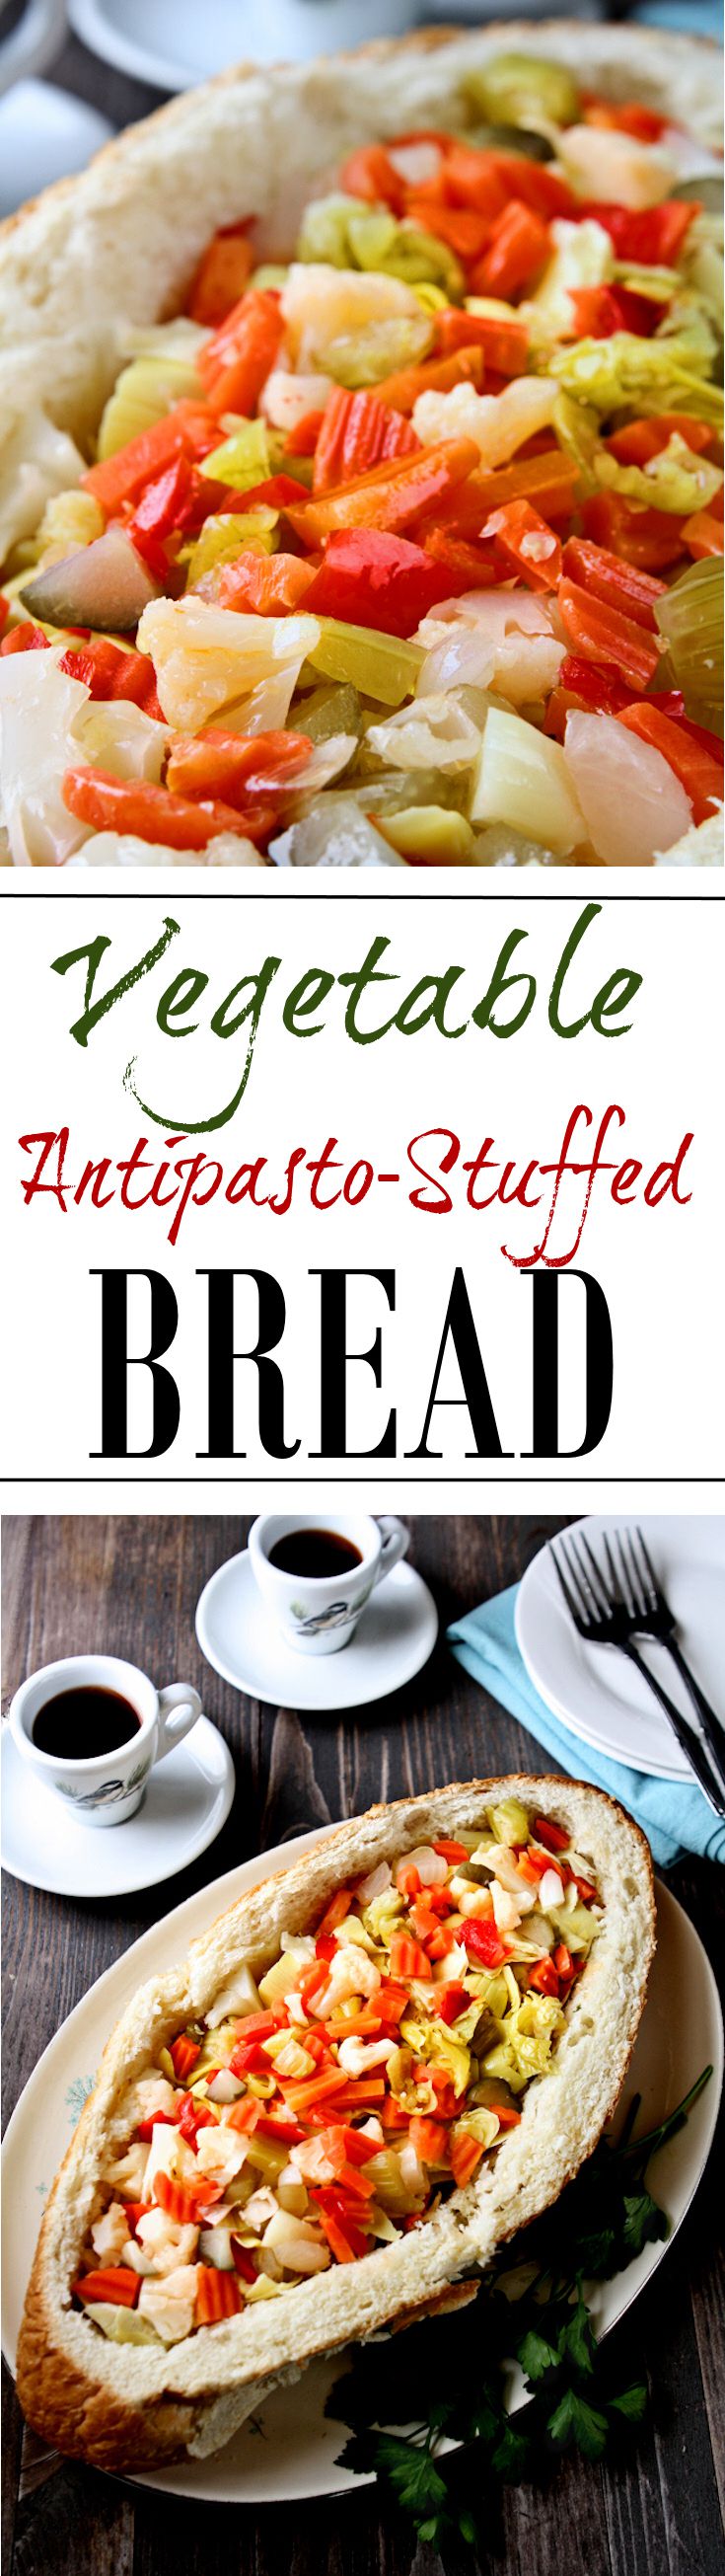 Vegetable Antipasto-Stuffed Bread | This is such a tasty vegetarian antipasto stuffed bread. Plus, you can pull this delicious appetizer together in 30 minutes or less! | heavenlyhomecooking.com